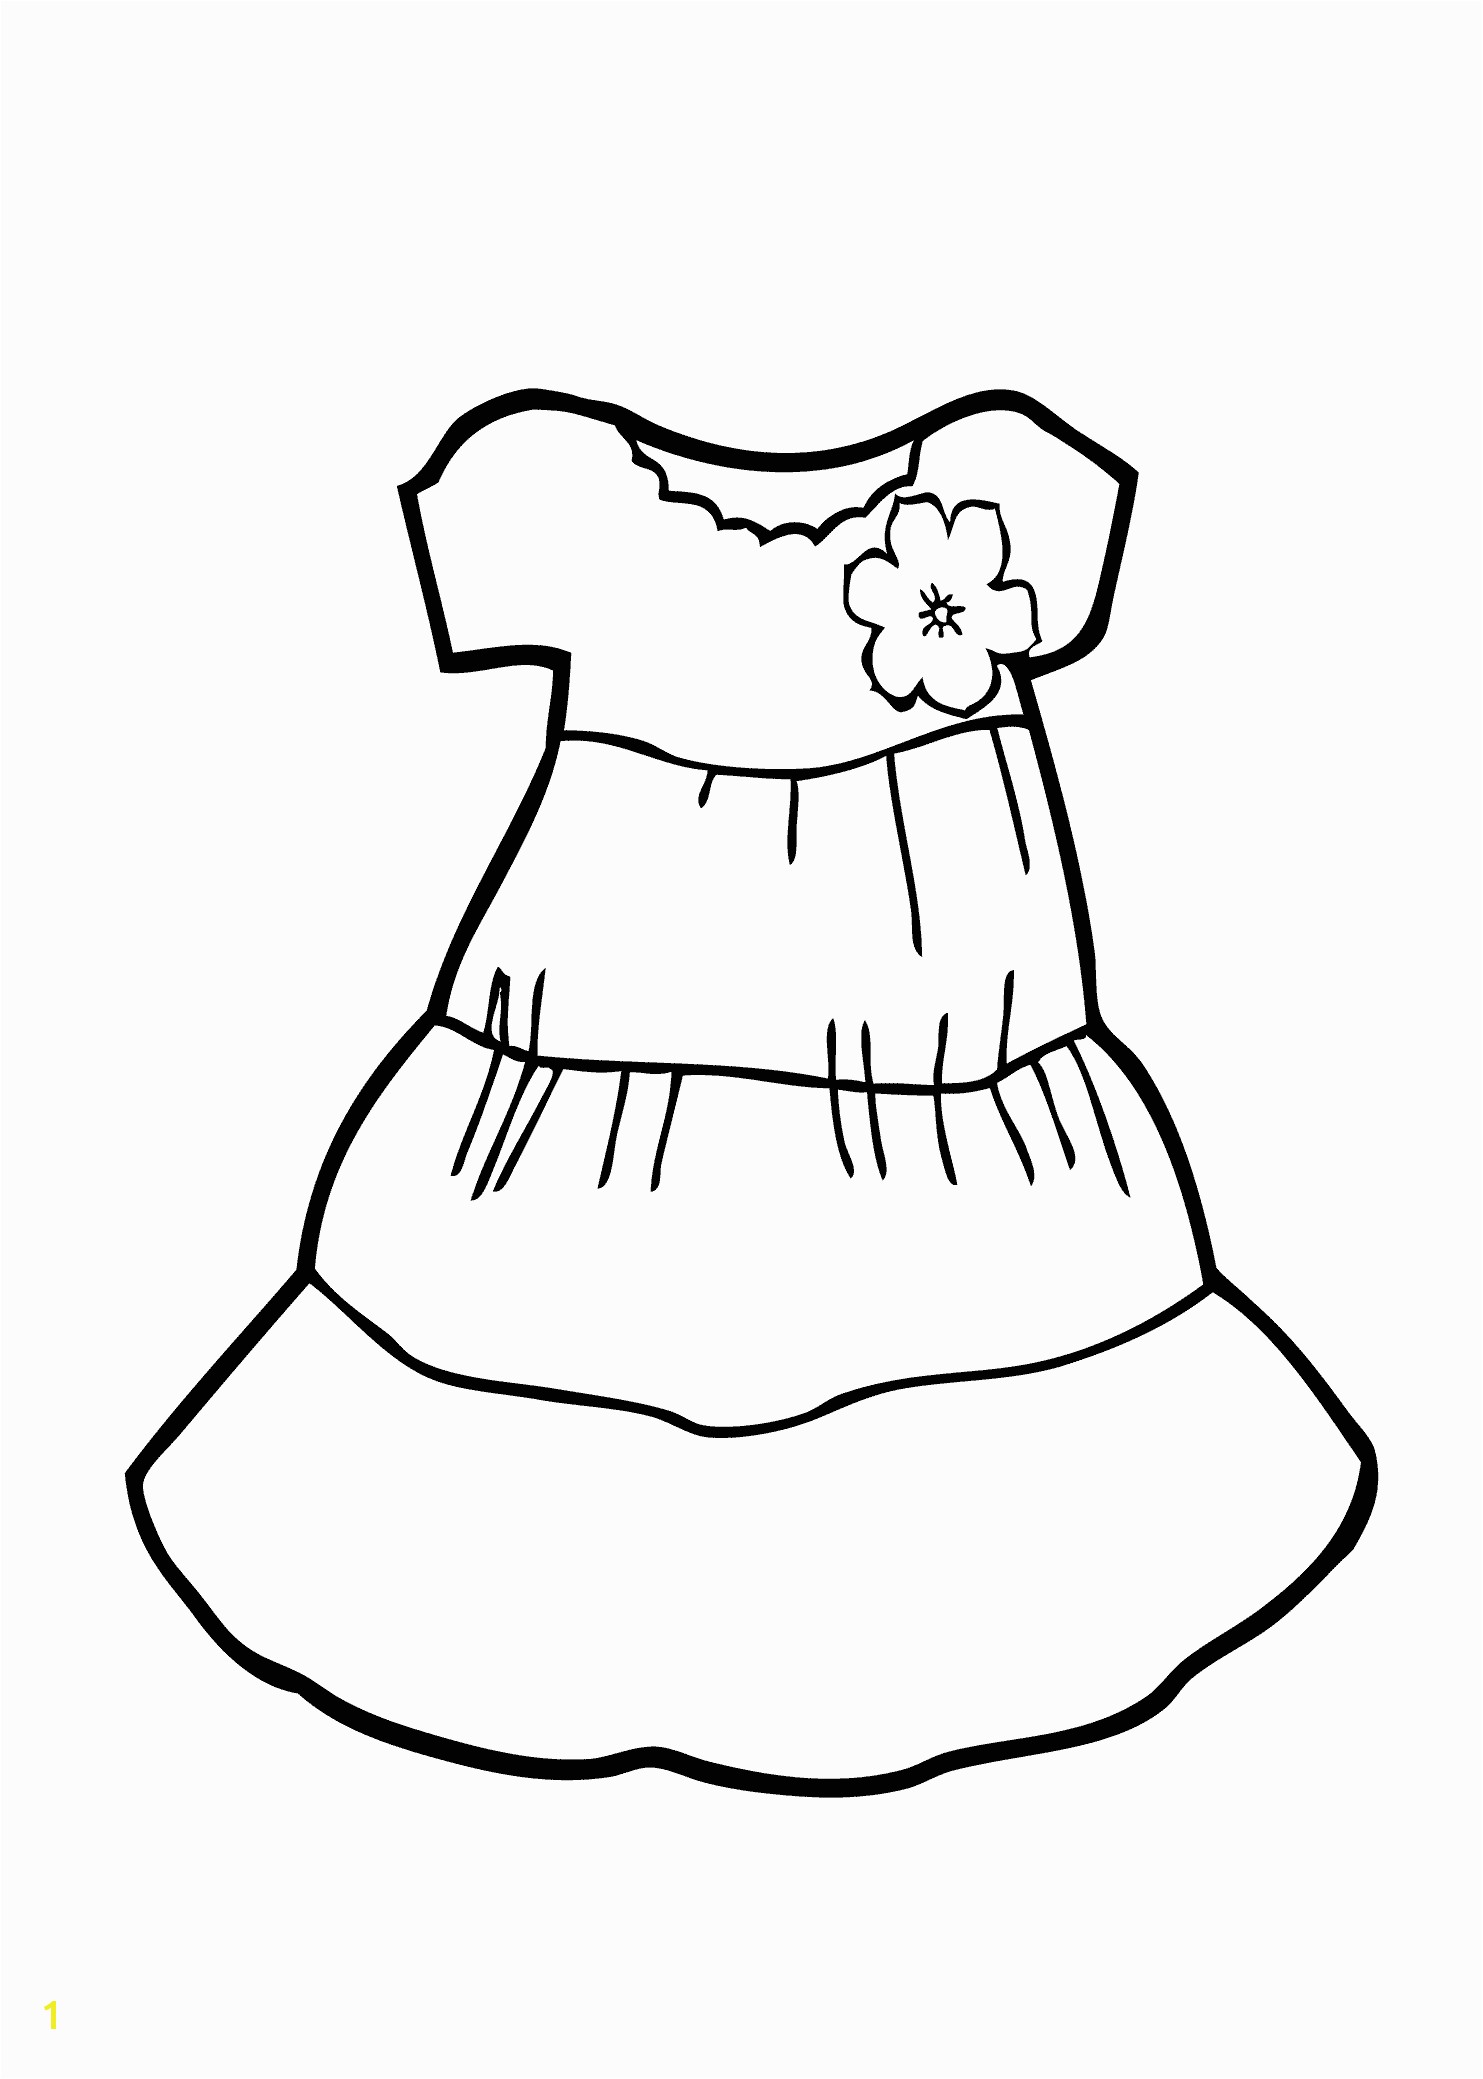 Coloring Page Of A Dress Light Dress Coloring Page for Girls Printable Free